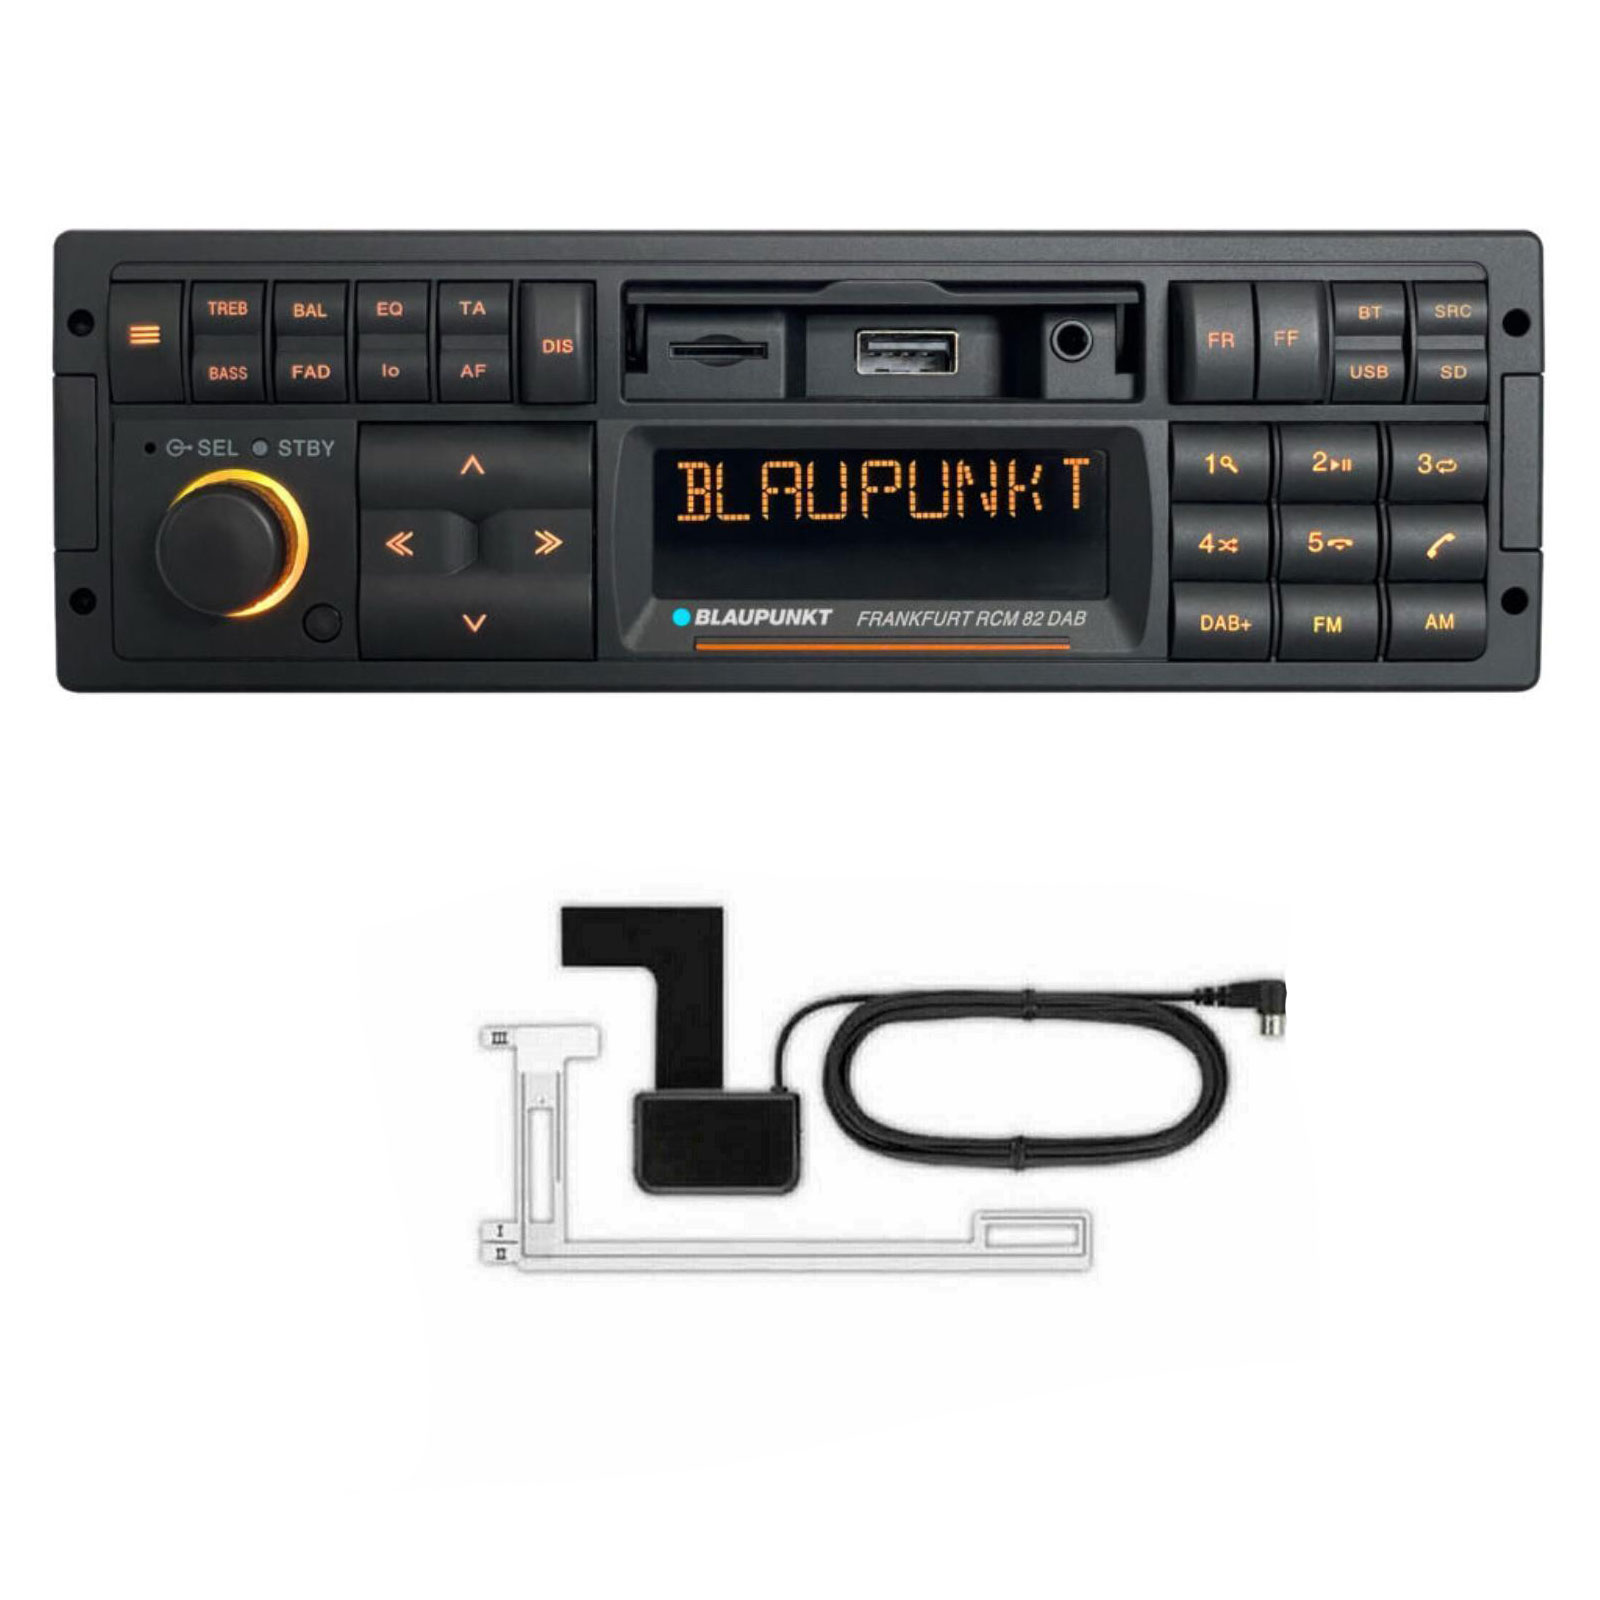 BLAUPUNKT Car Radio 8 Pin DIN TO 4 RCA Adapter Cable to add AMP on PORSCHE